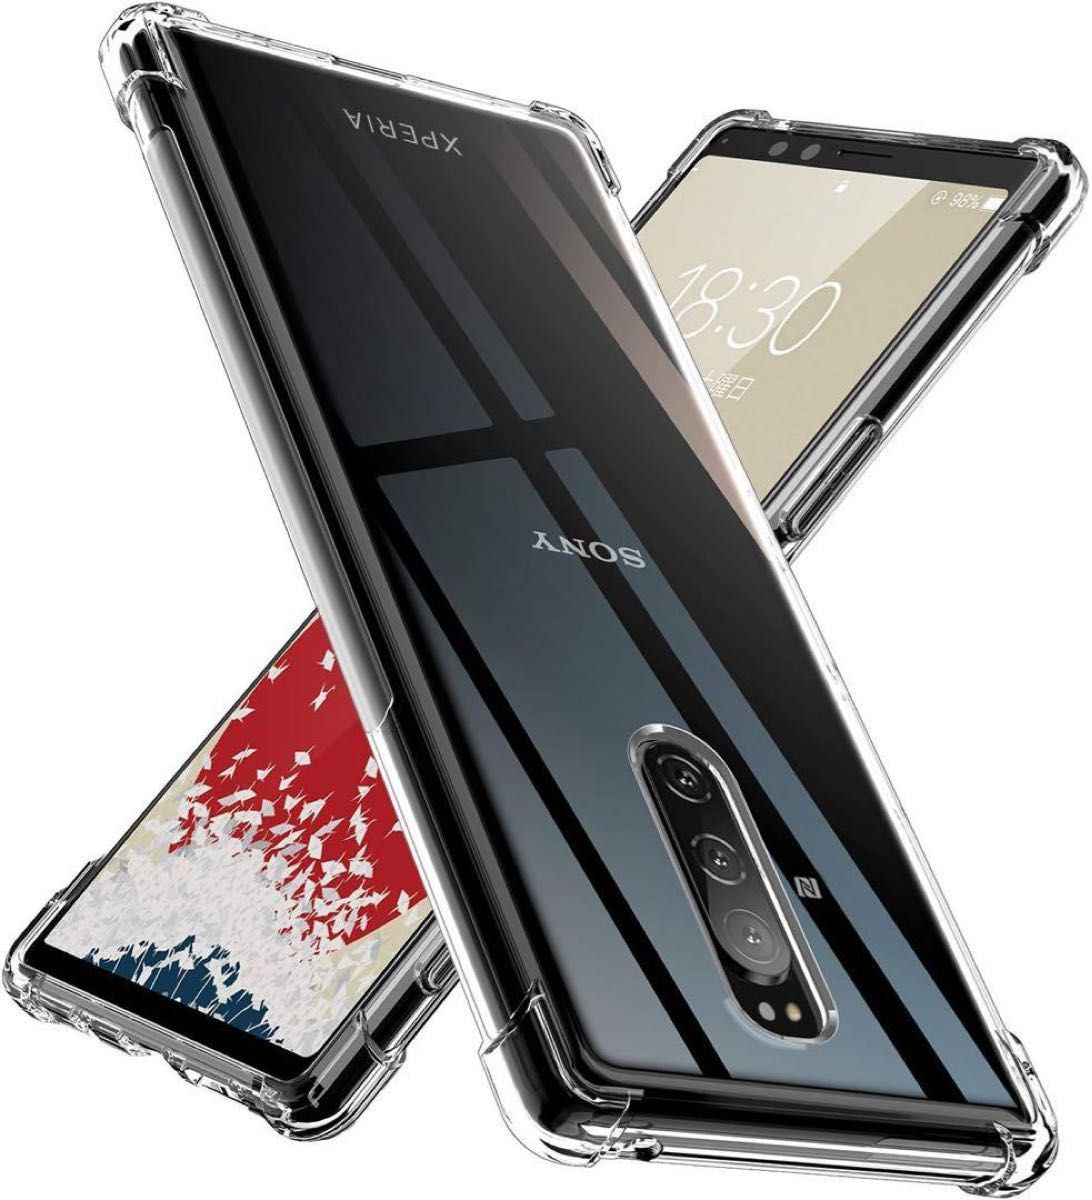 ★24h内発送★即購入OK★ONES Xperia1 ケース TPU SONY カバー スマホカバー Android